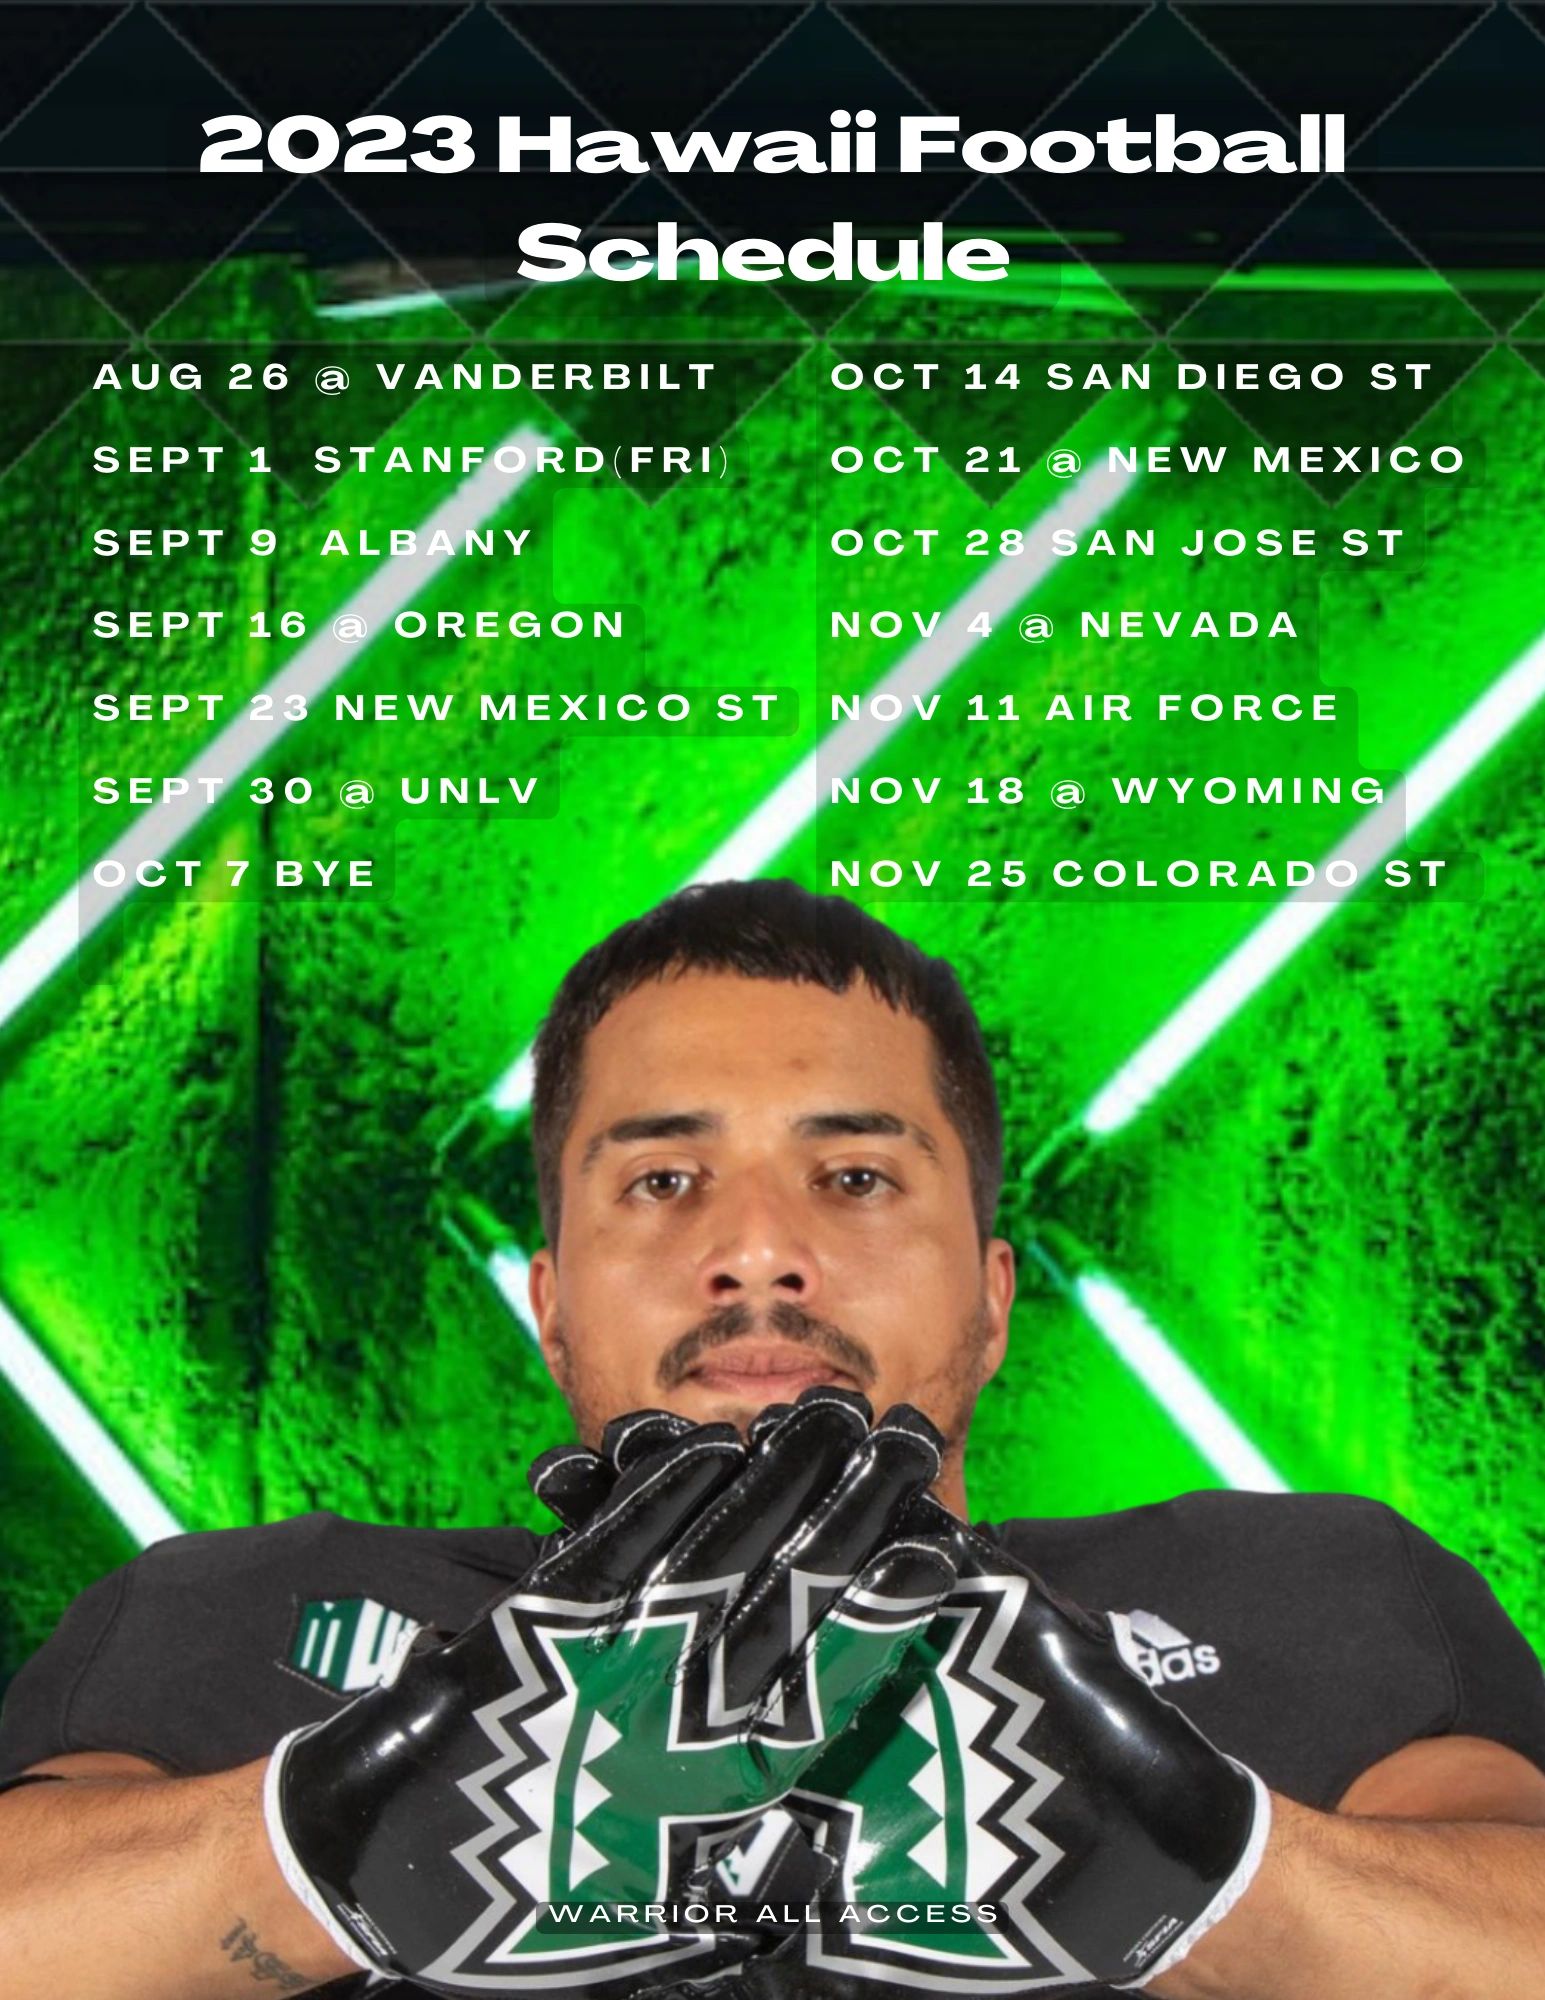 2023 Hawaii football schedule is out.